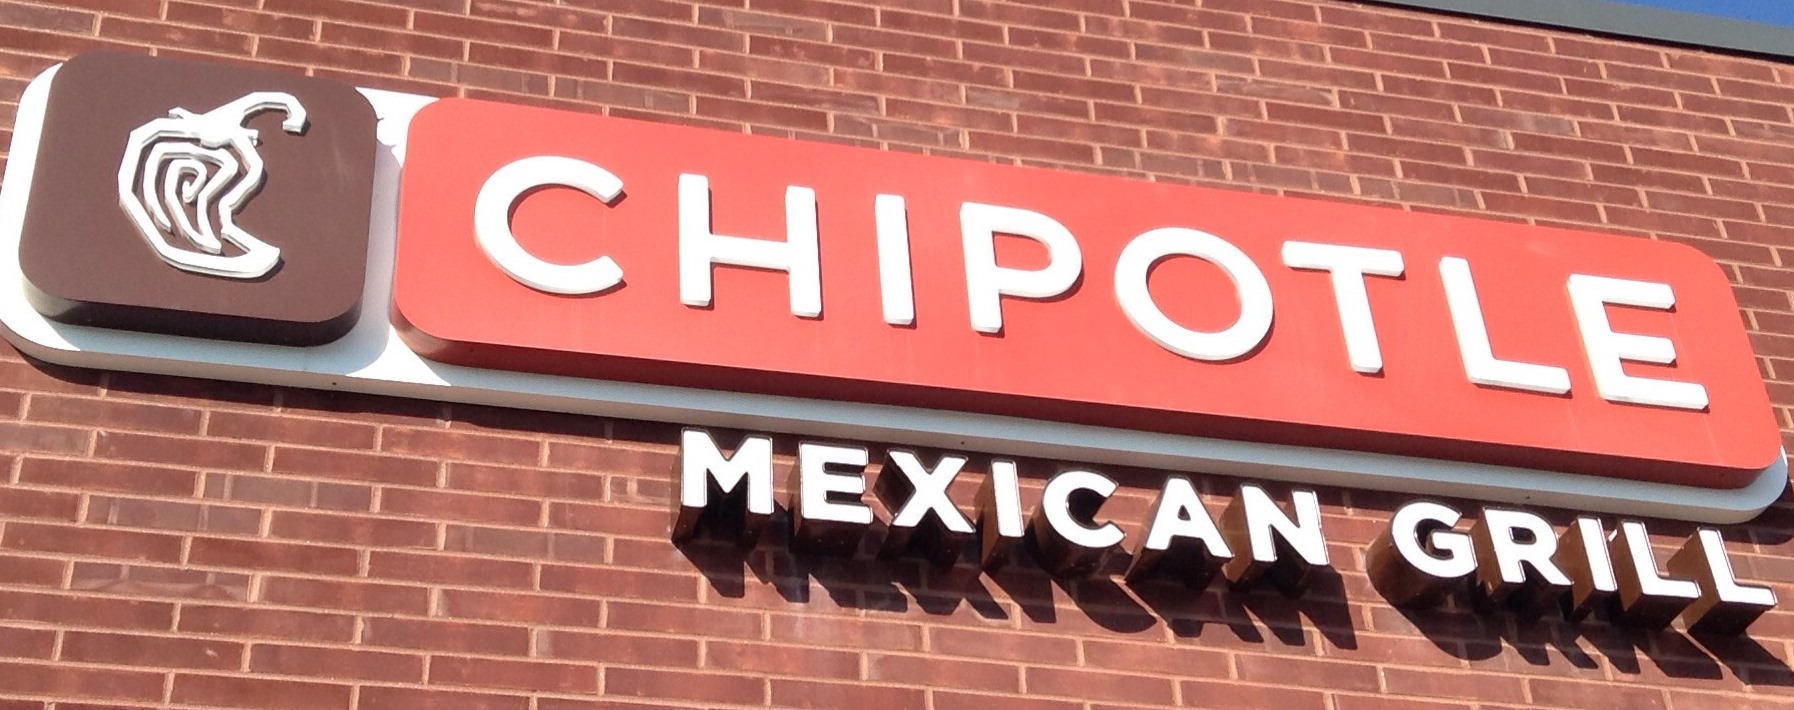 Sources Chipotle coming to LIC; Jackson Heights location opening Dec